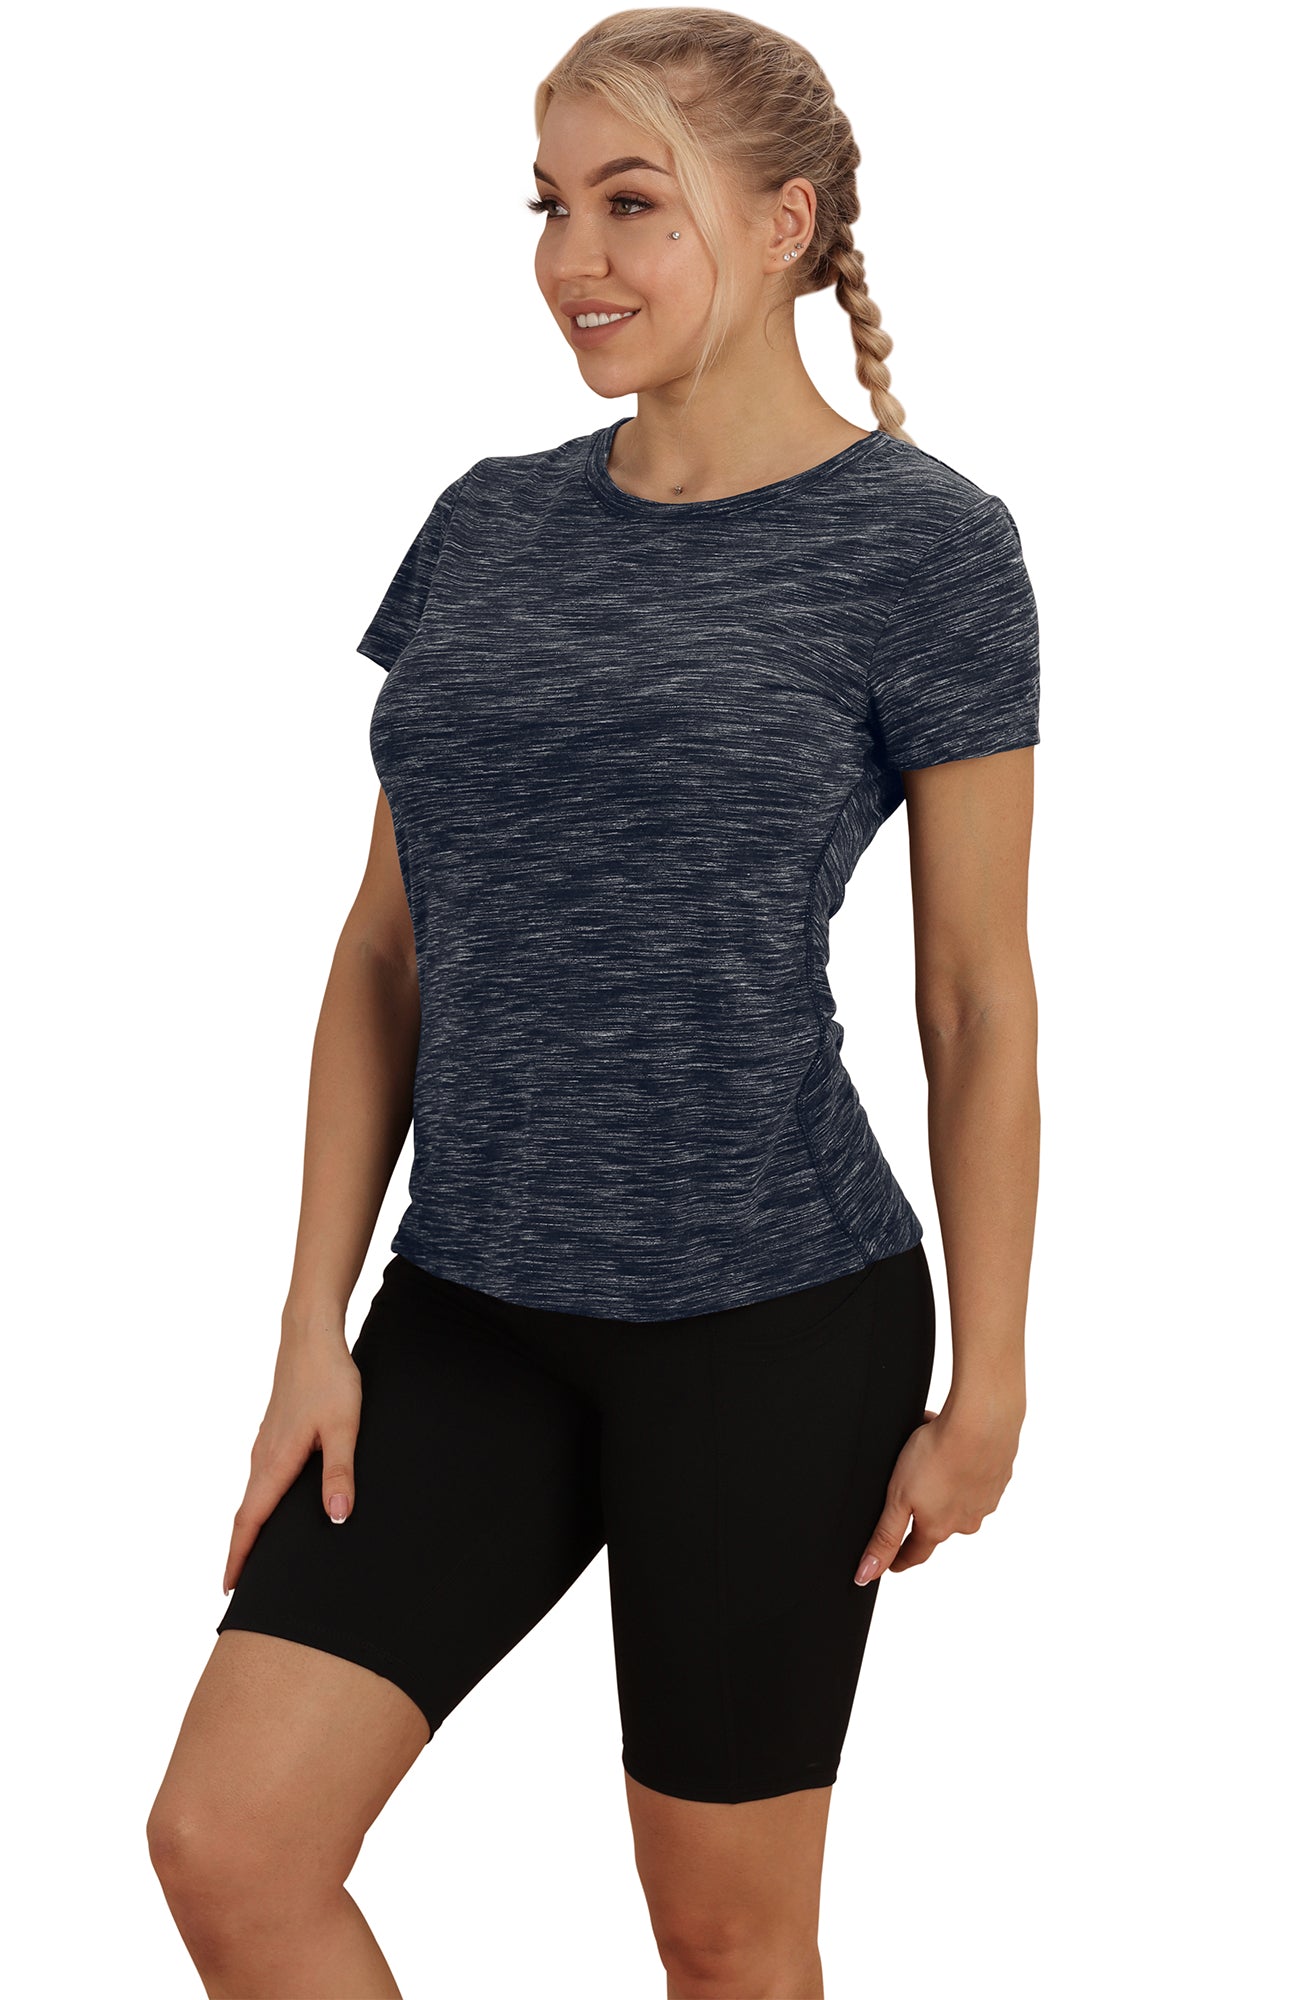  Loovoo Gym Tops Athletic Shirts for Women Womens